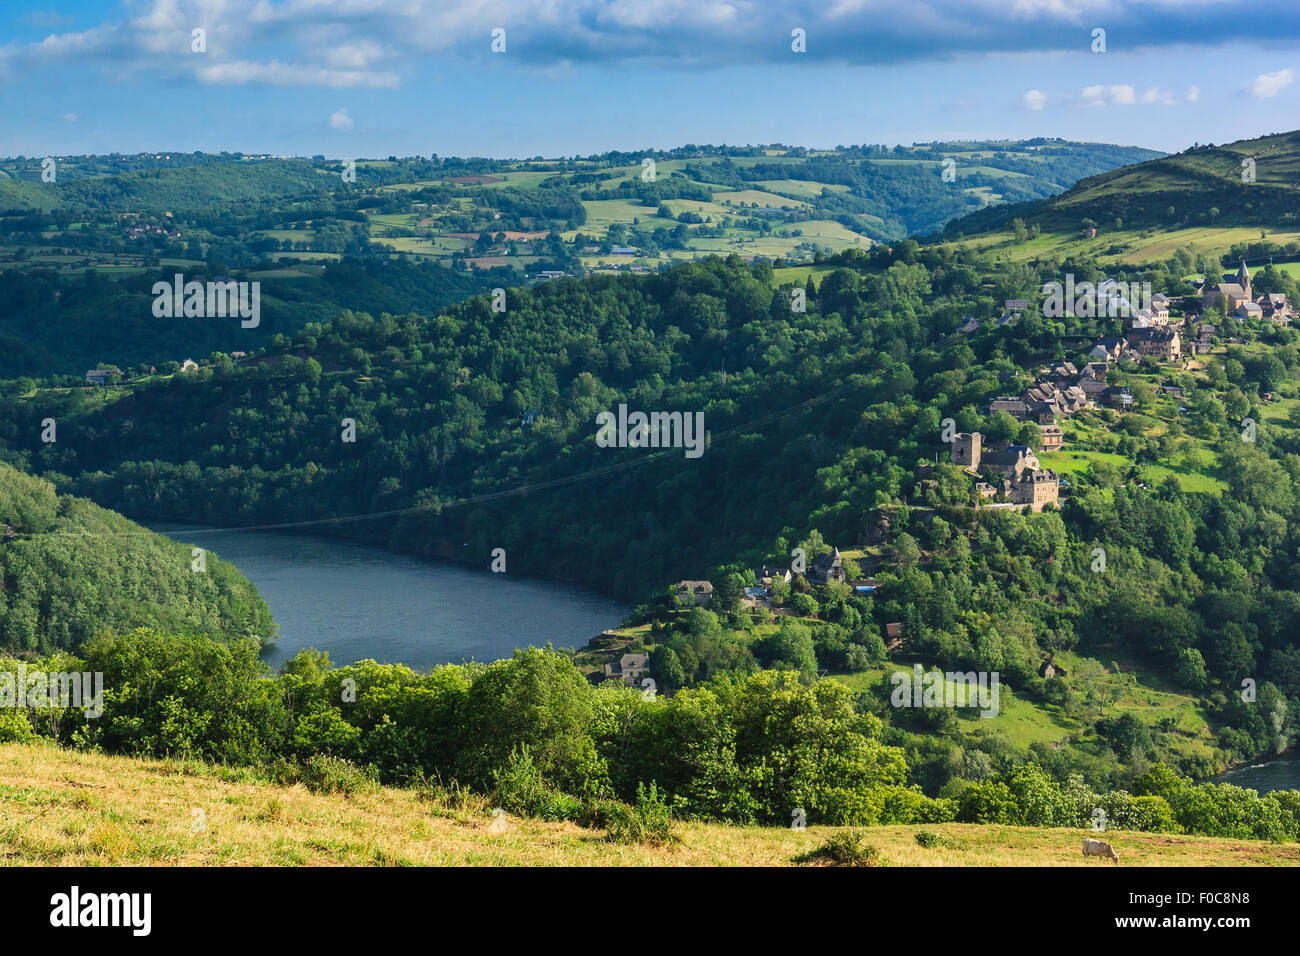 Landscape with hill and medieval houses around lake Lac de Castelnau. Formed by a dam in the river Lot, South France, Europe. Stock Photo